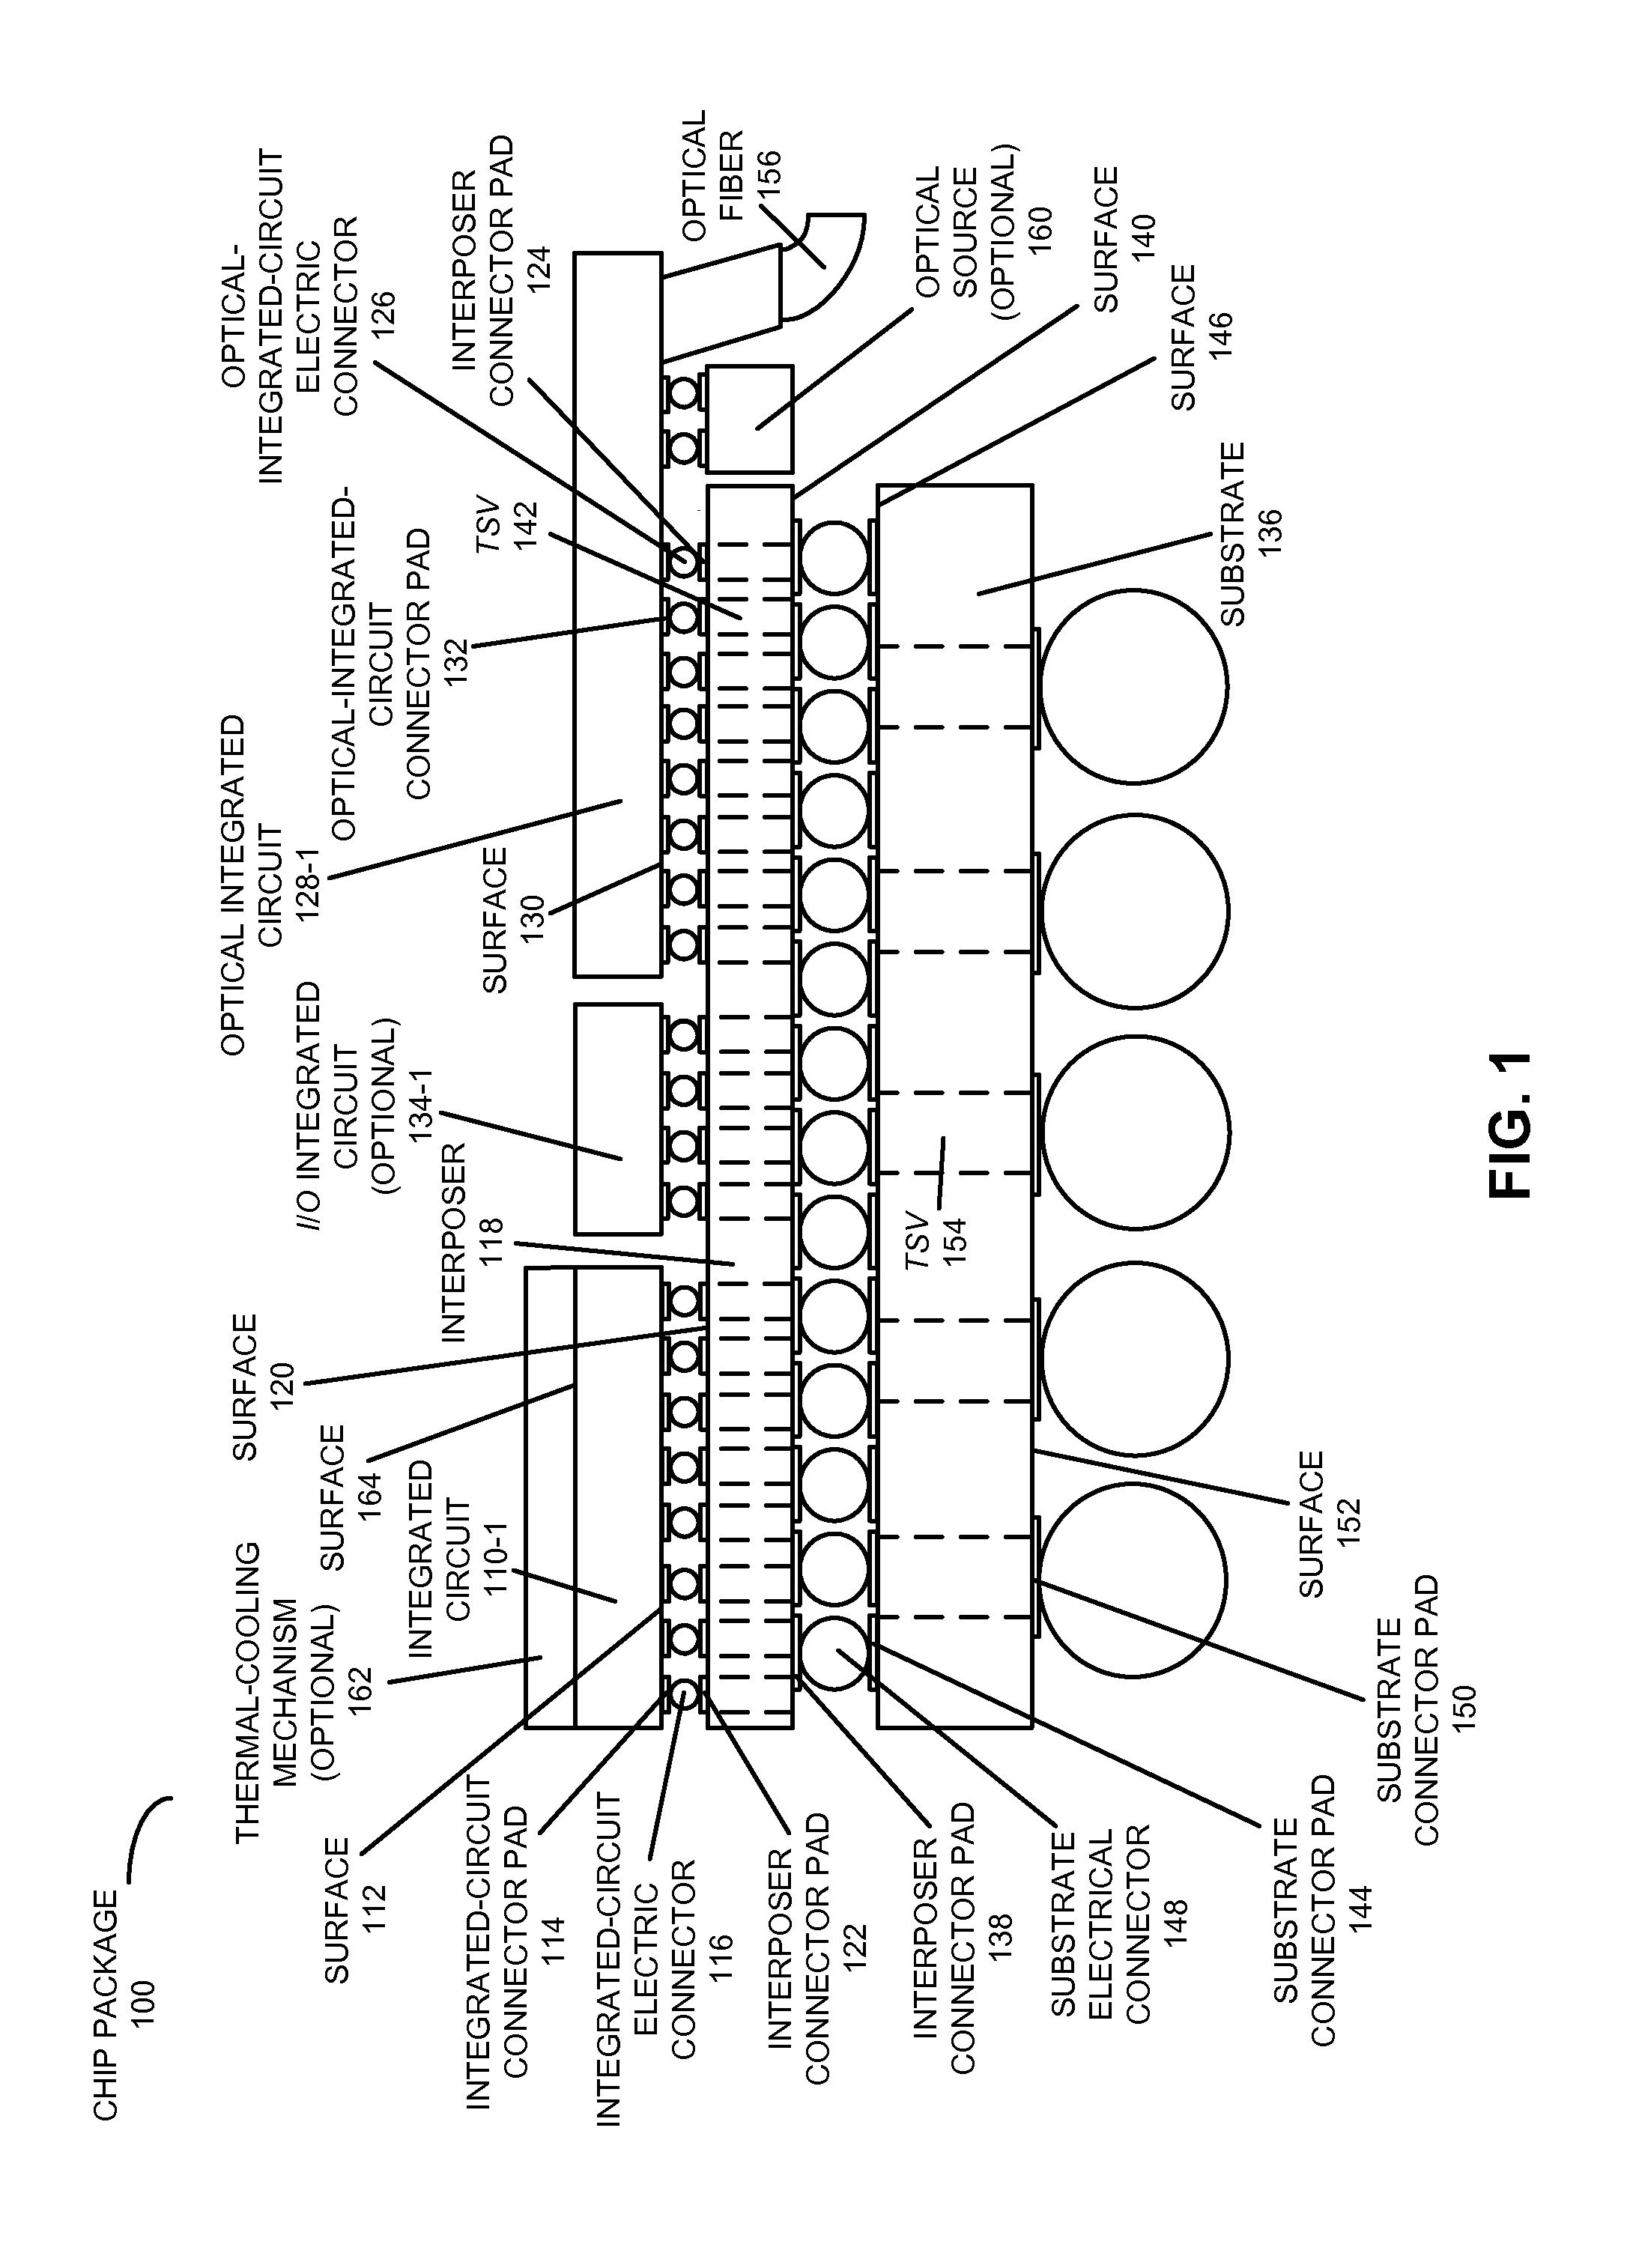 Hybrid-integrated photonic chip package with an interposer